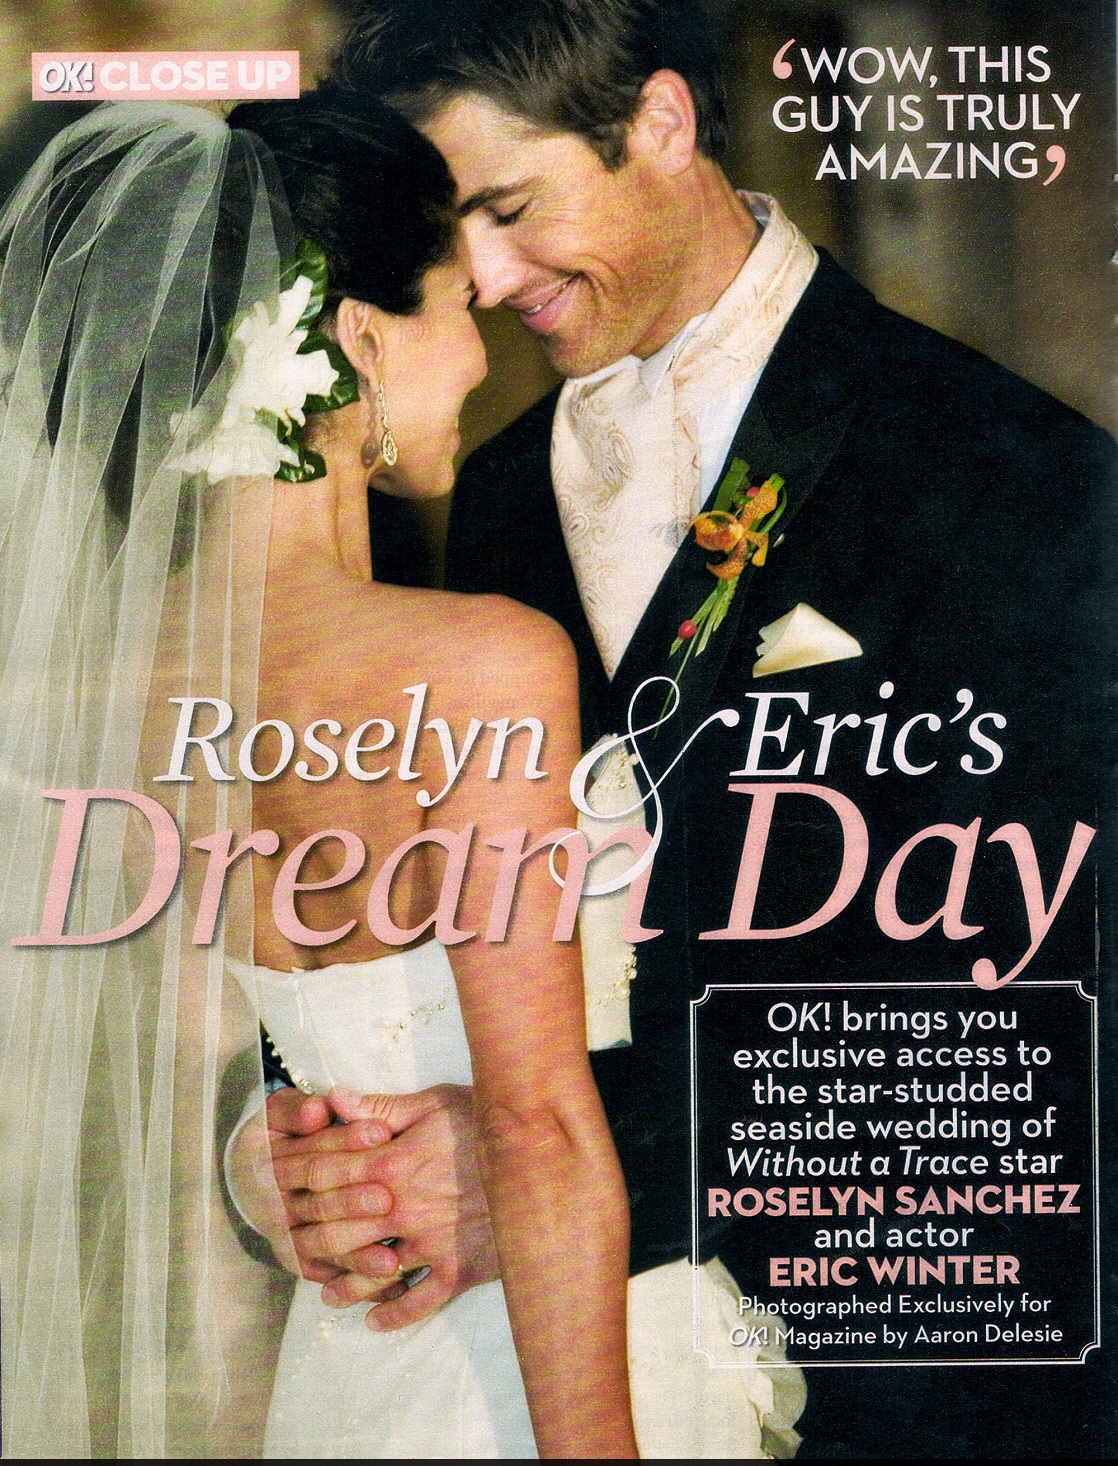 Red Carpet Wedding: Roselyn Sanchez and Eric Winter.